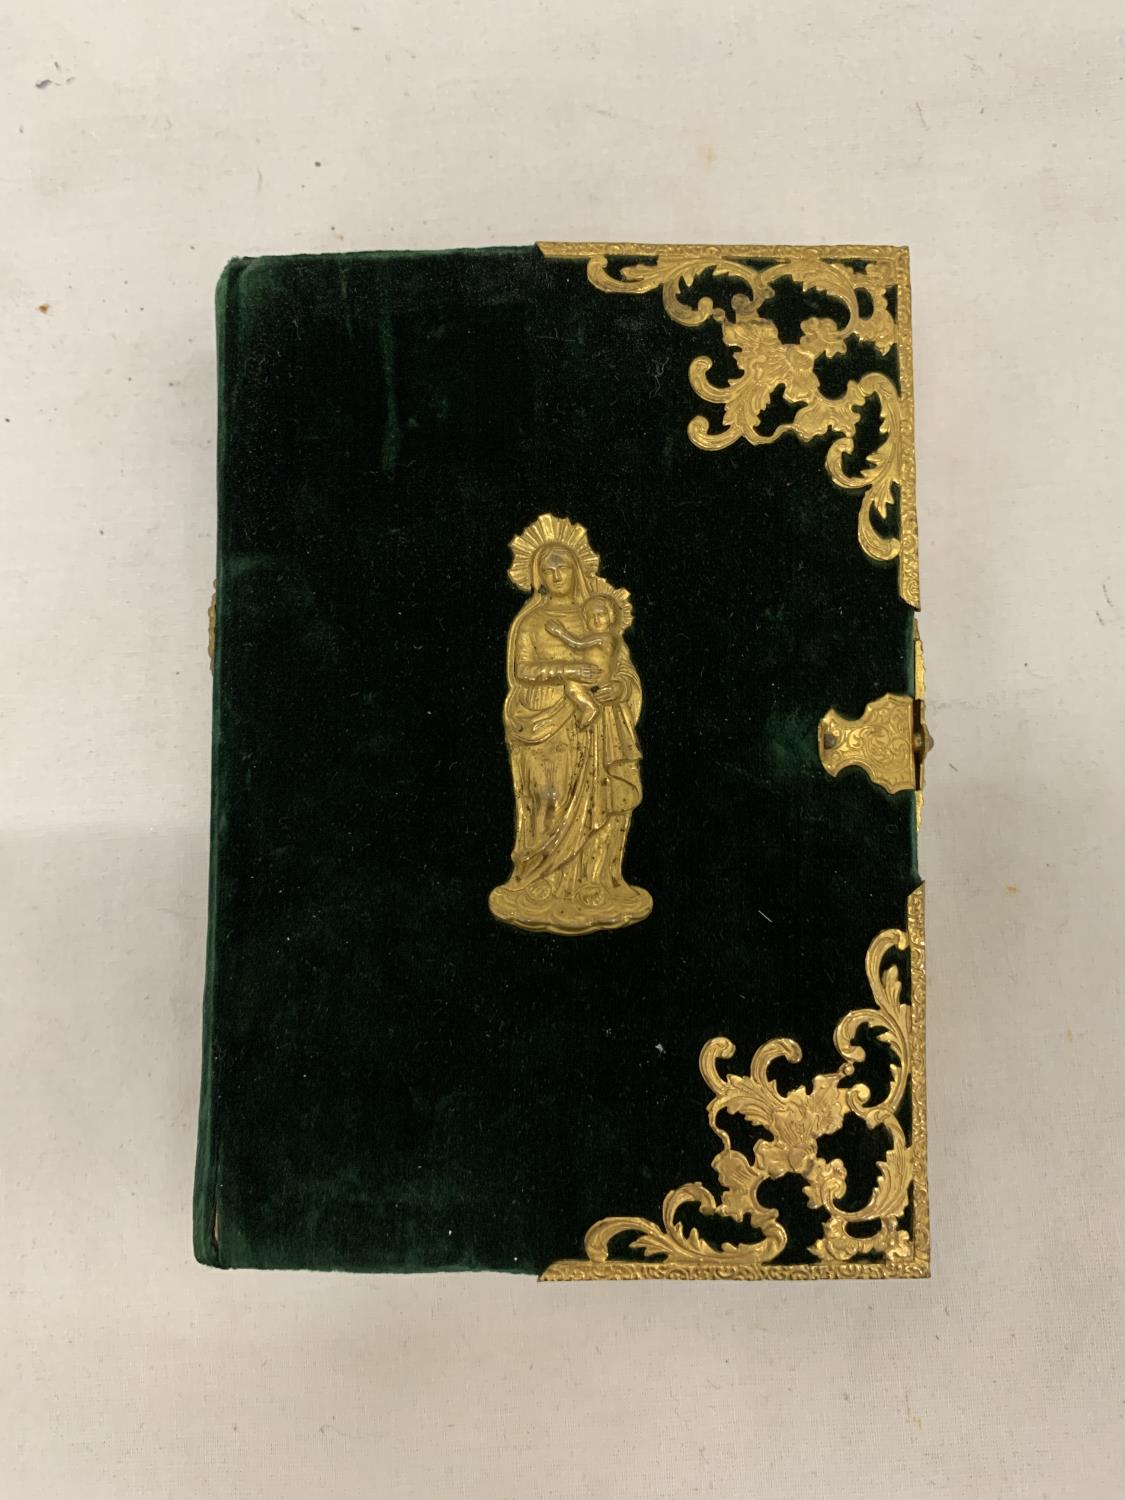 A FRENCH PRAYER BOOK IN CUSHION FELT, WITH GOLD LEAF PAGES AND GILT METAL FRET WORK